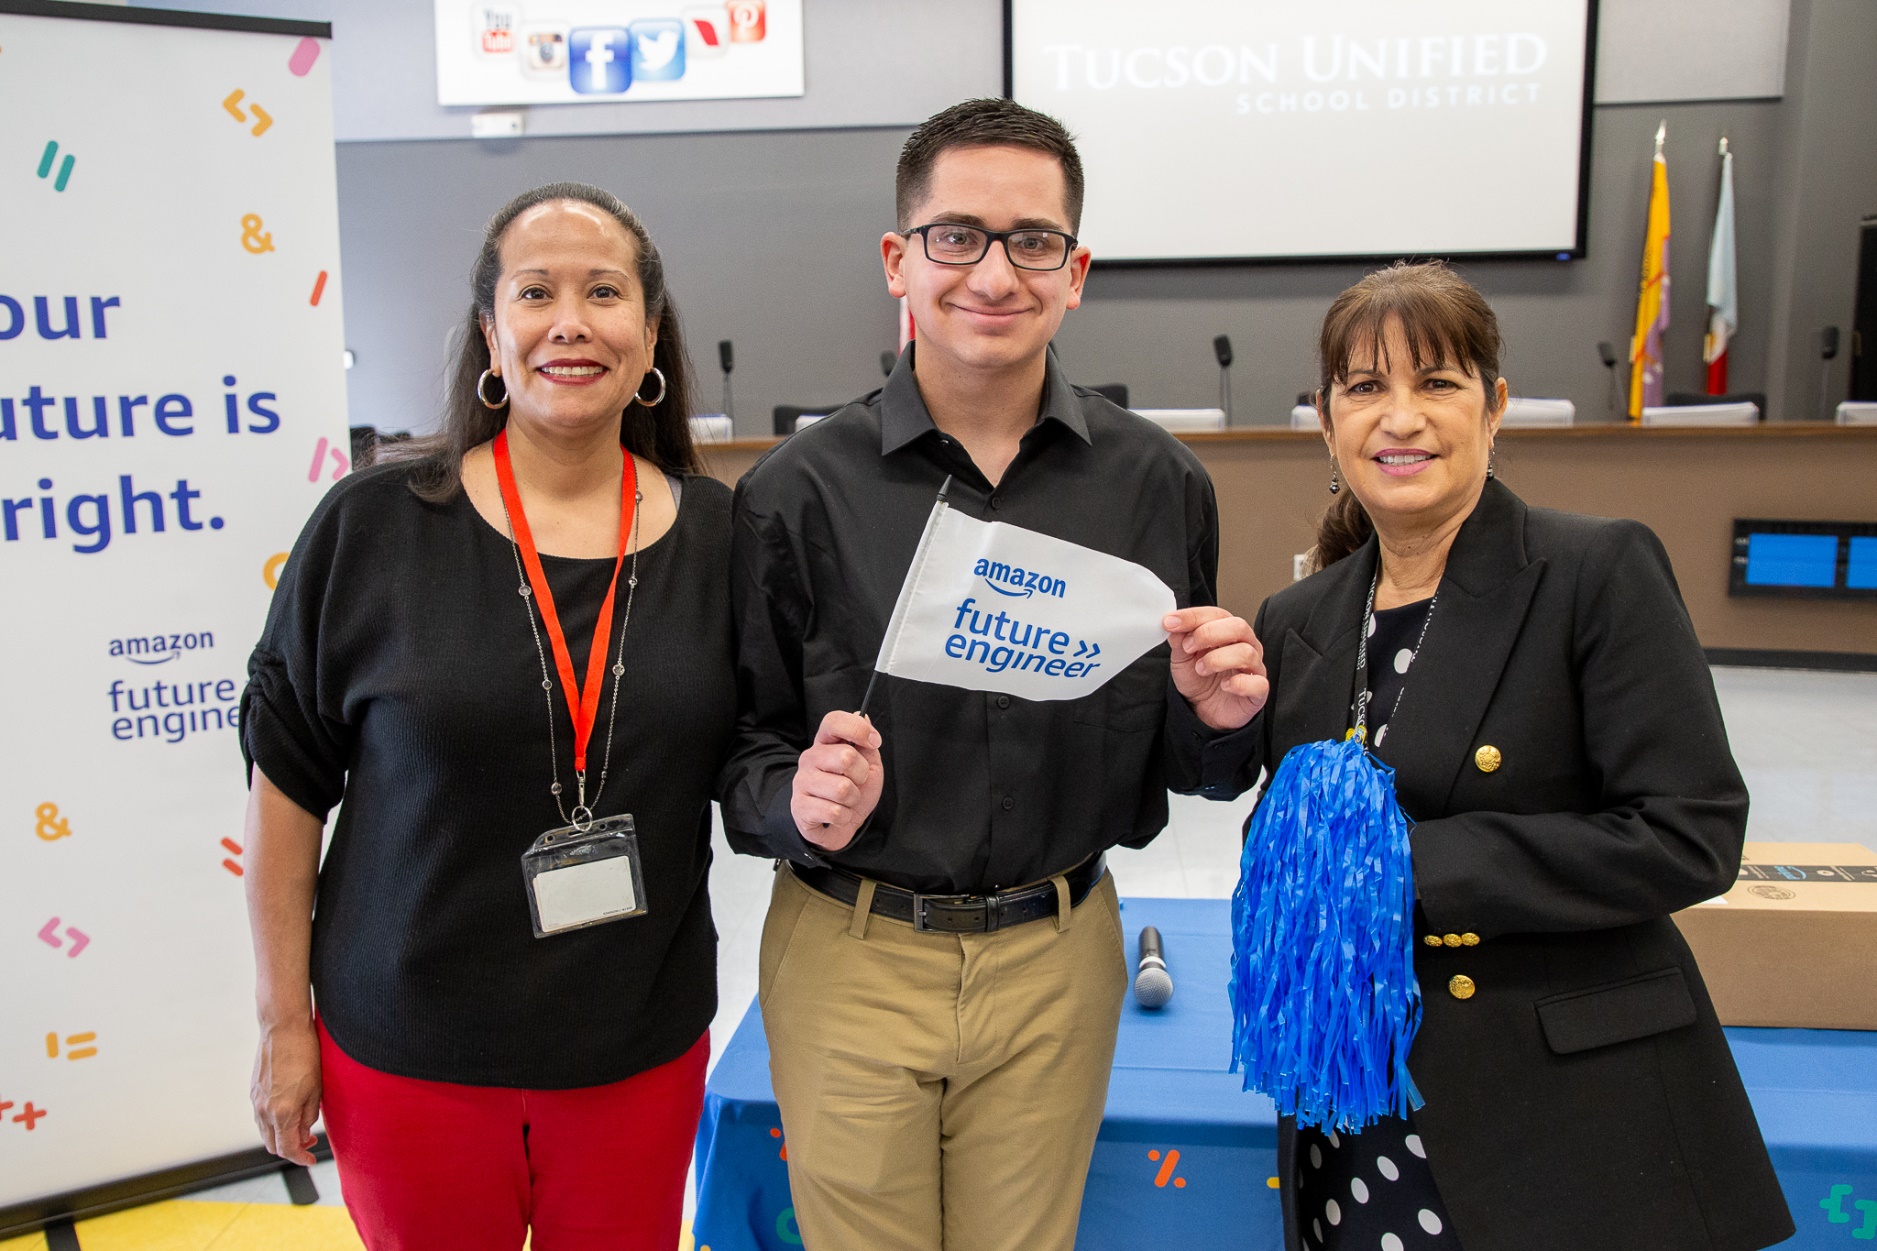 Tucson High student Anthony Talavera holds up an Amazon Future Engineer flag and poses with two staff members.